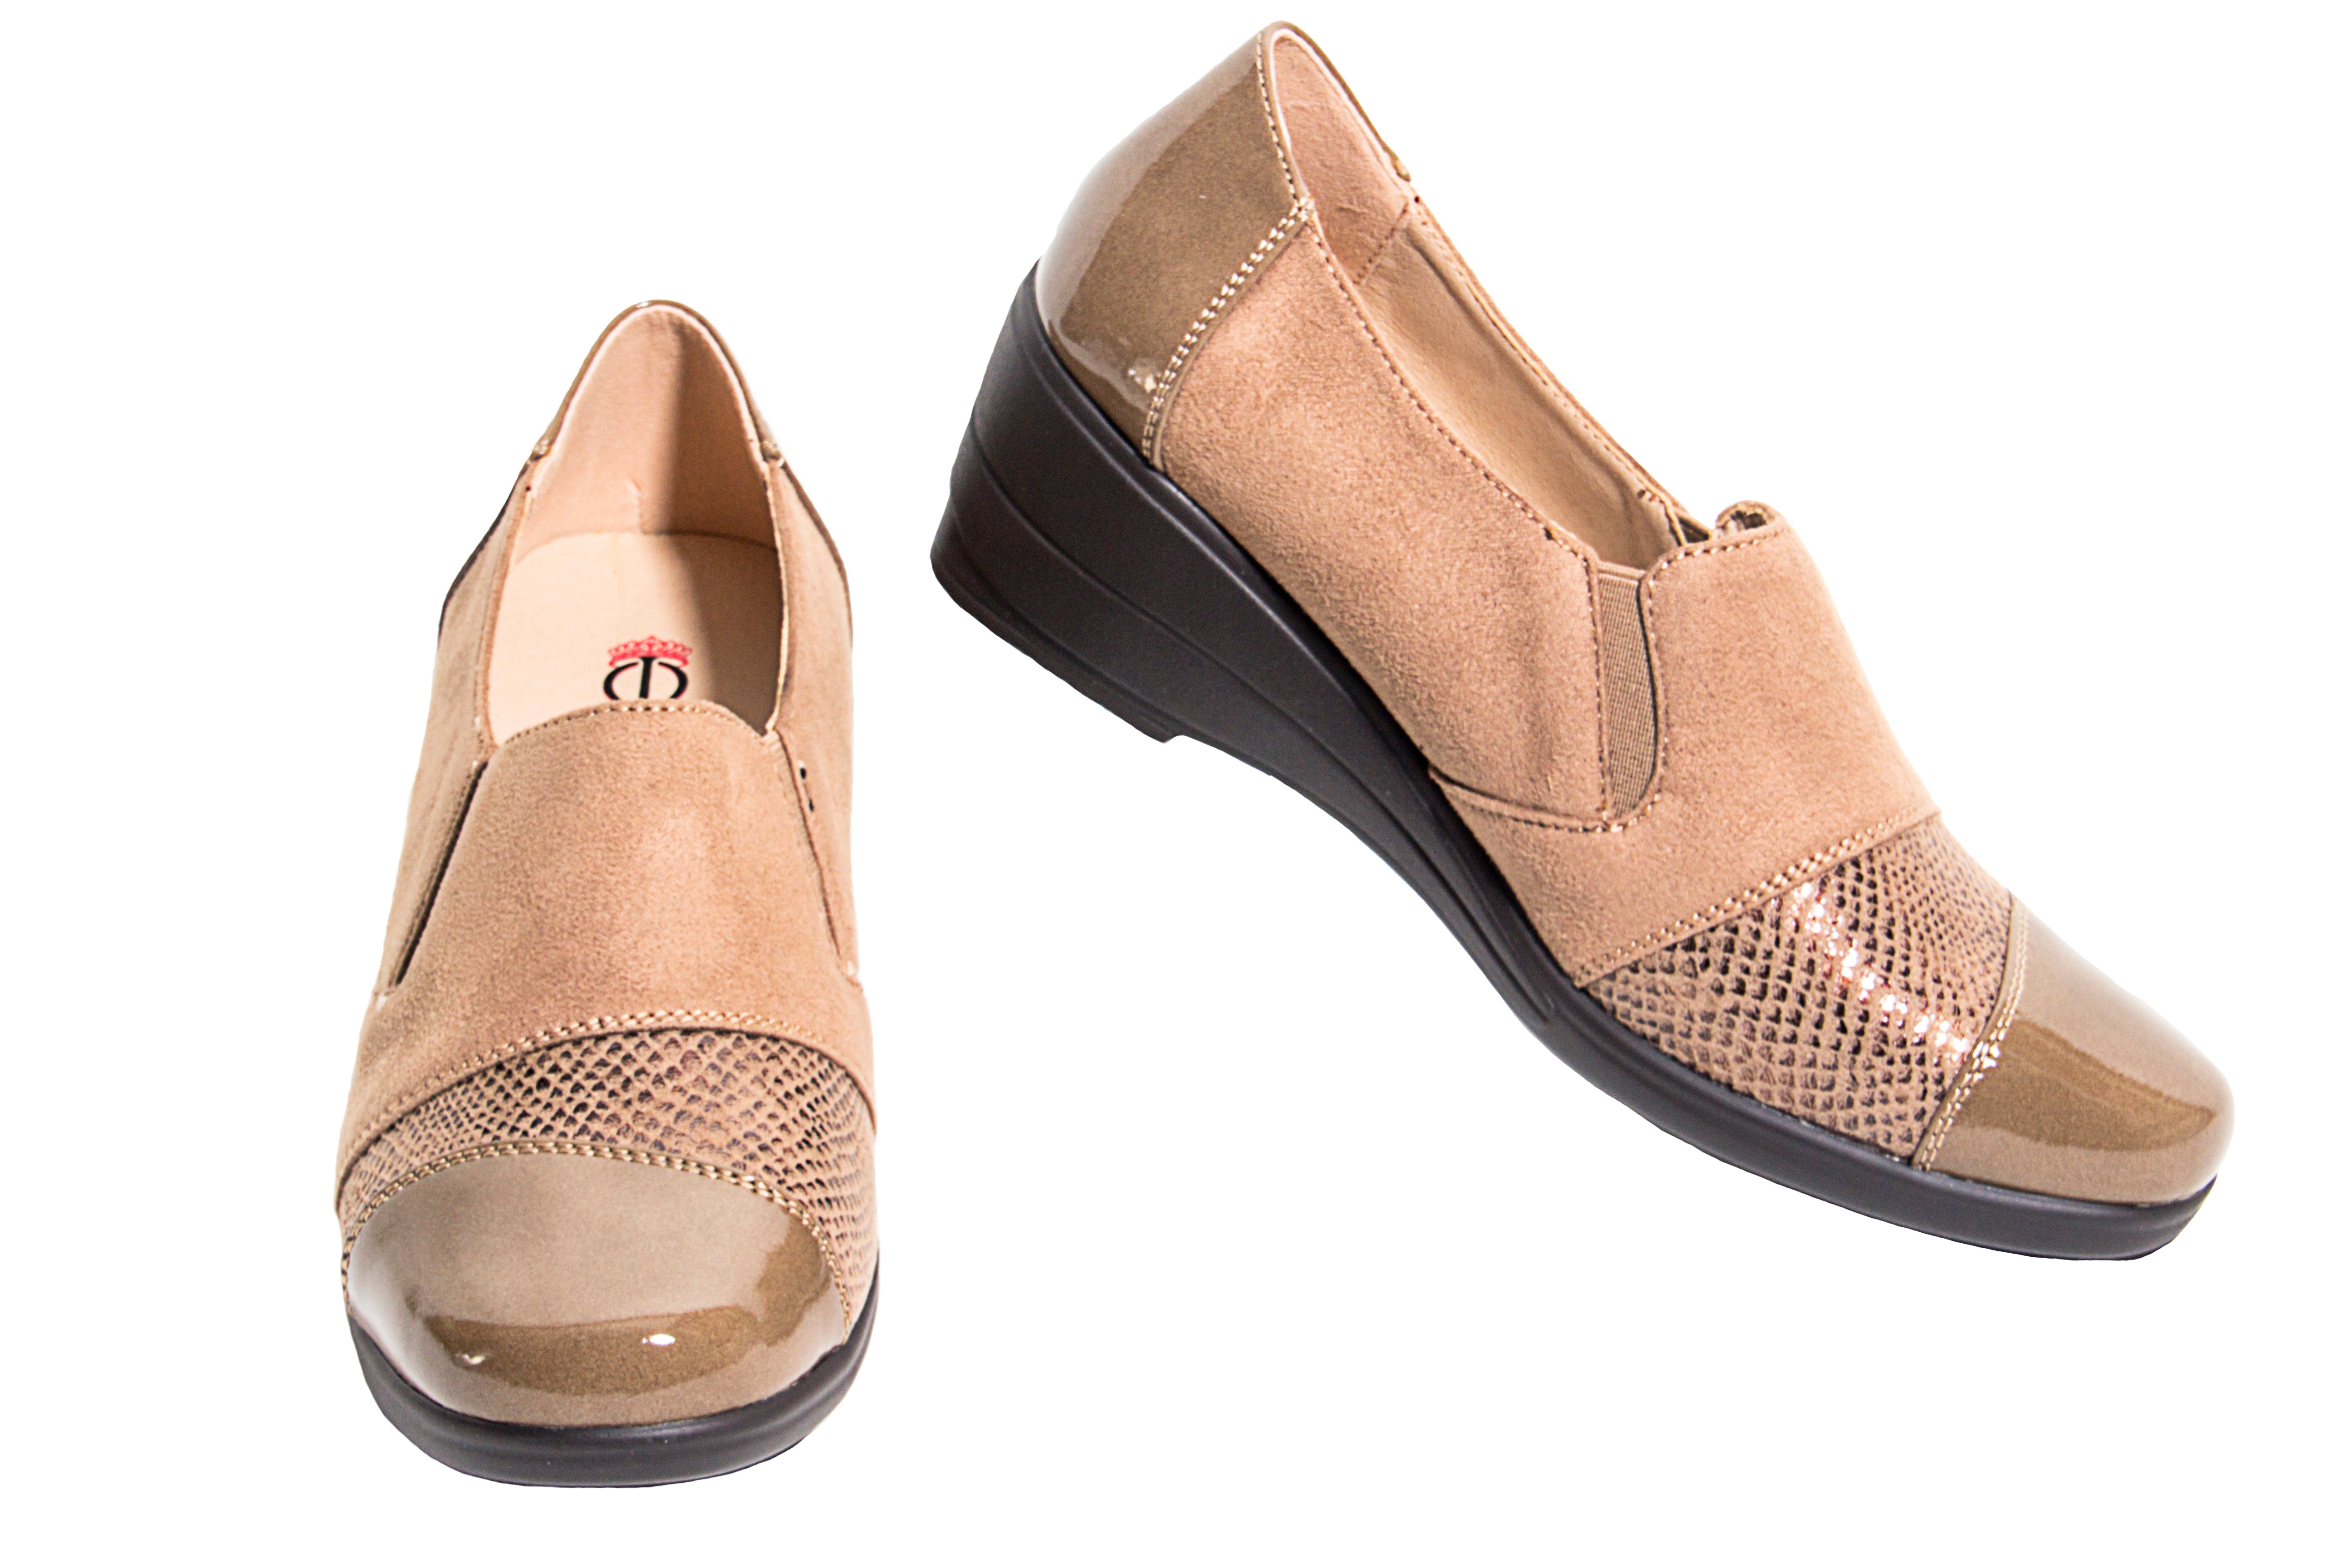 Snake skin and leather looking pattern wedge slip on shoes